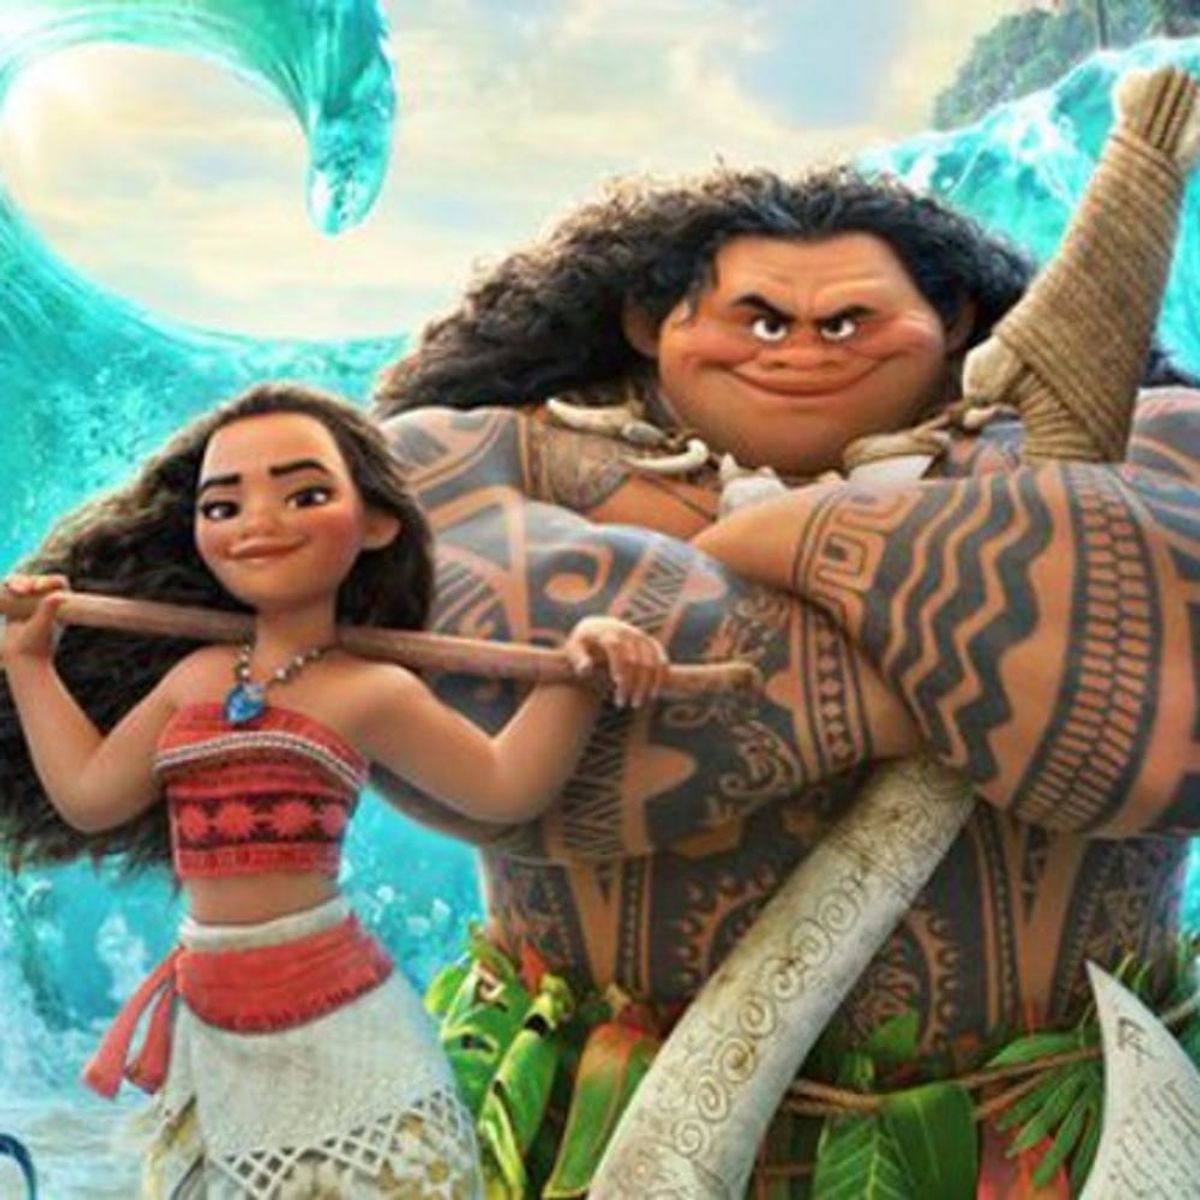 Disney’s Moana Halloween Costume Is Causing Some Serious Controversy